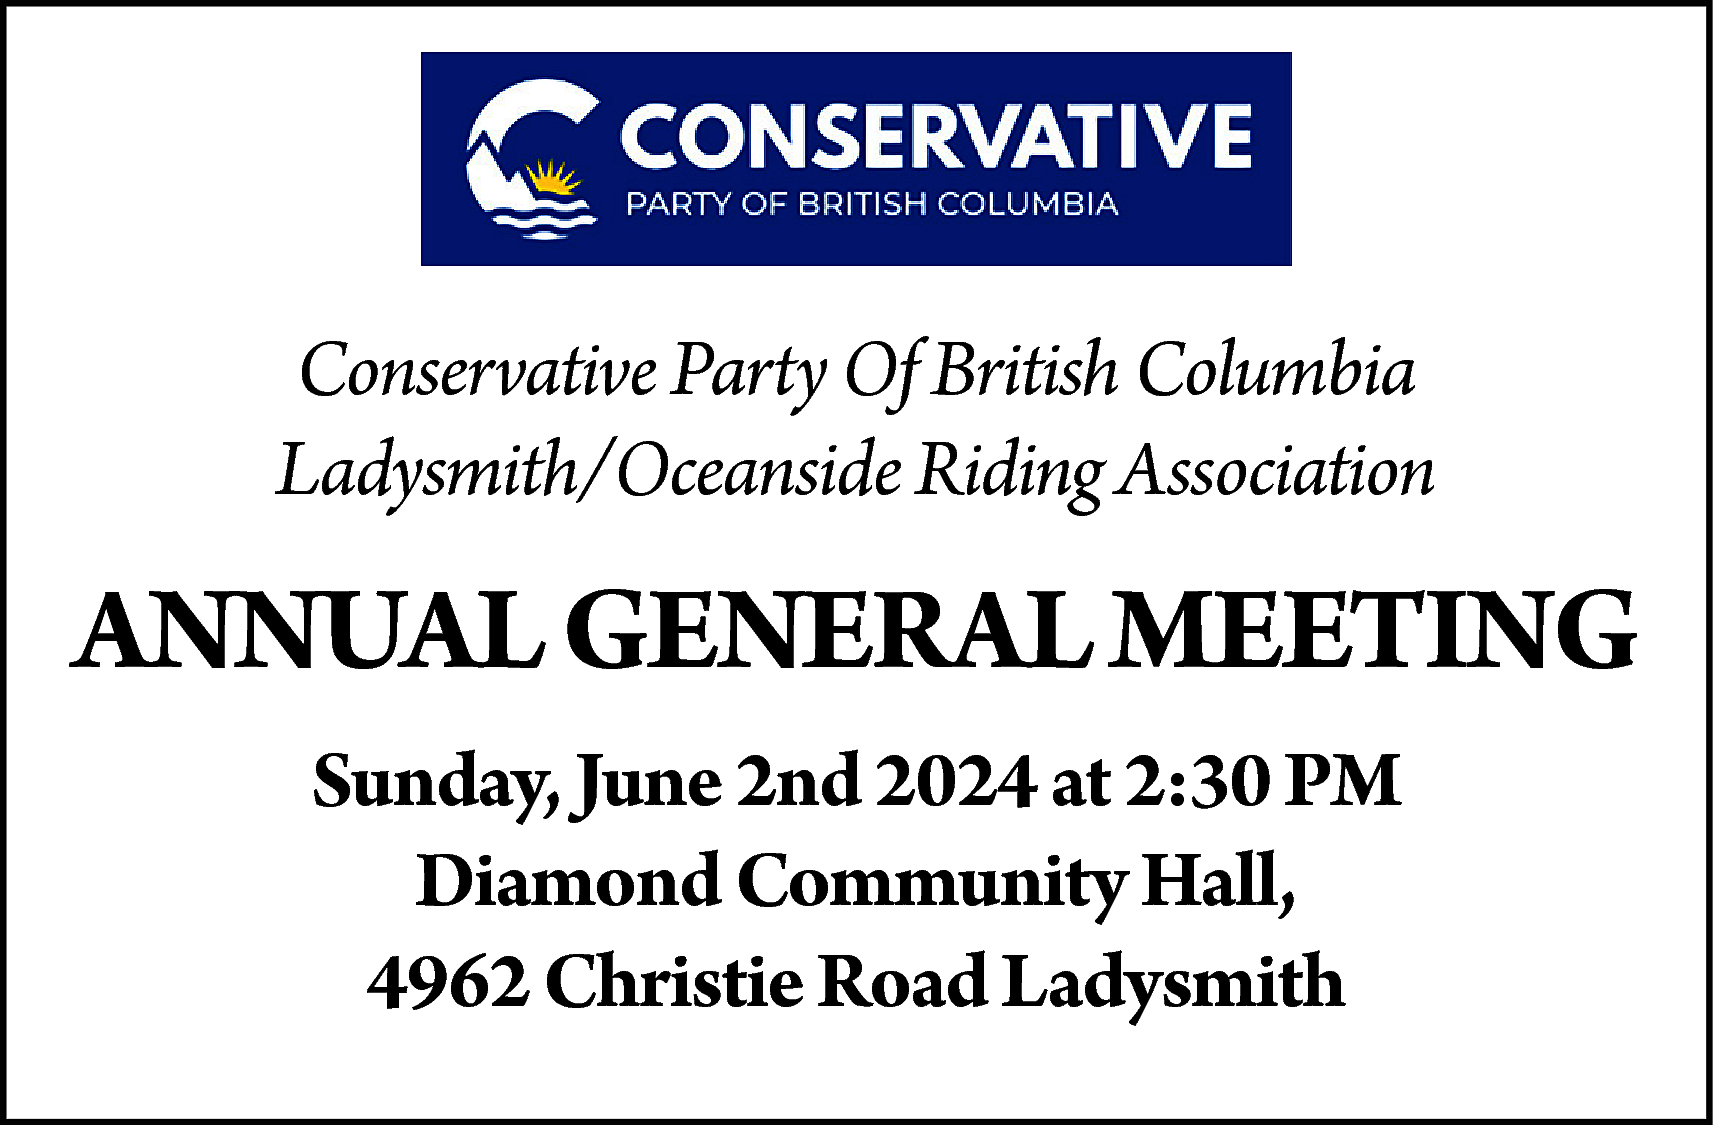 Conservative Party Of British Columbia  Conservative Party Of British Columbia  Ladysmith/Oceanside Riding Association    ANNUAL GENERAL MEETING  Sunday, June 2nd 2024 at 2:30 PM  Diamond Community Hall,  4962 Christie Road Ladysmith    